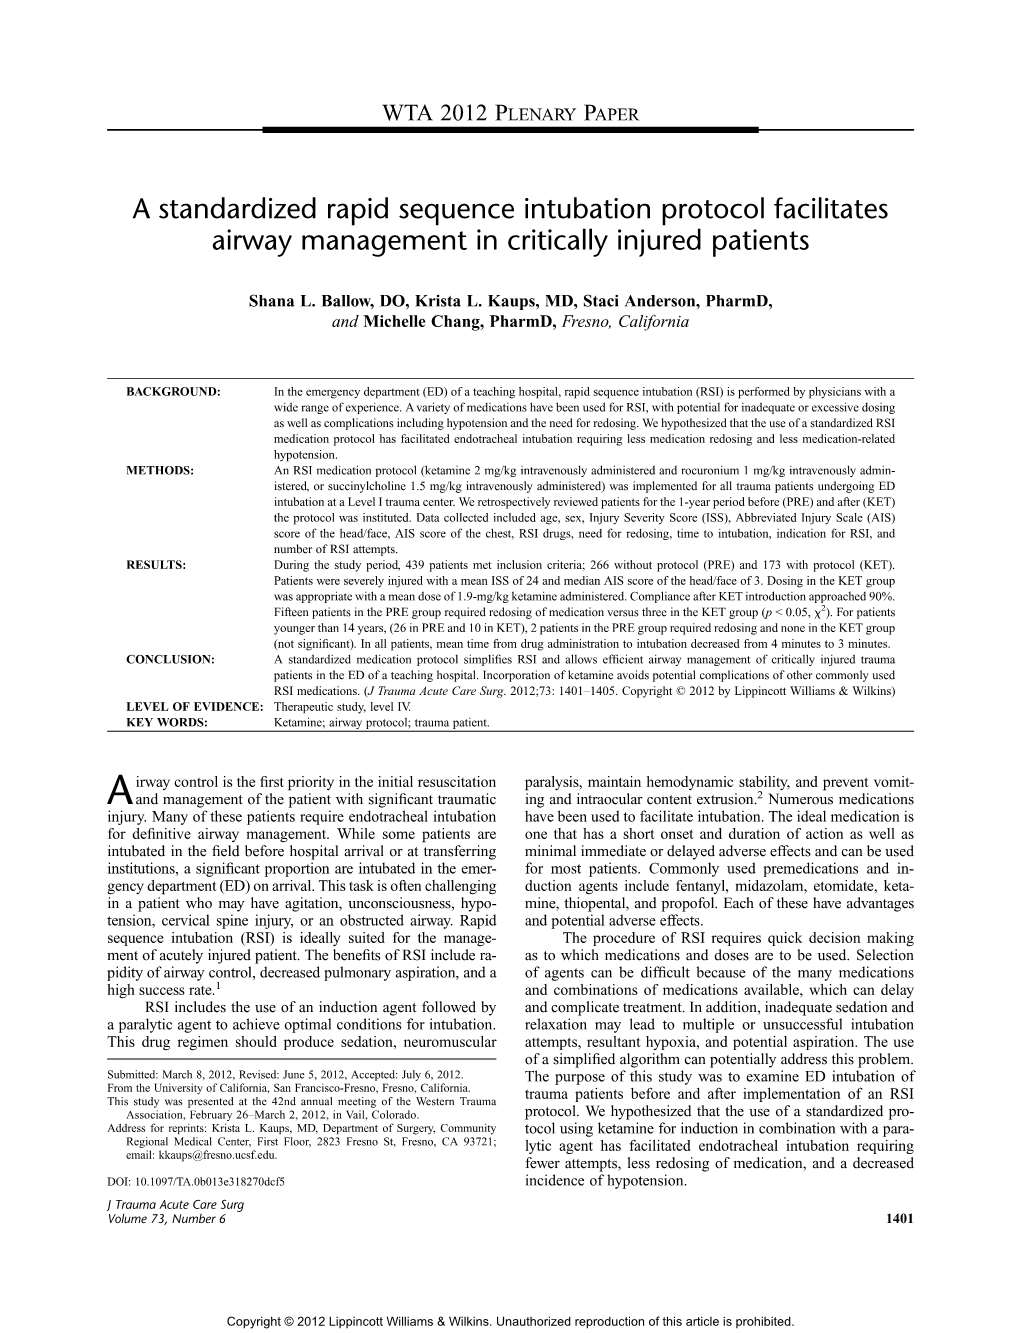 A Standardized Rapid Sequence Intubation Protocol Facilitates Airway Management in Critically Injured Patients